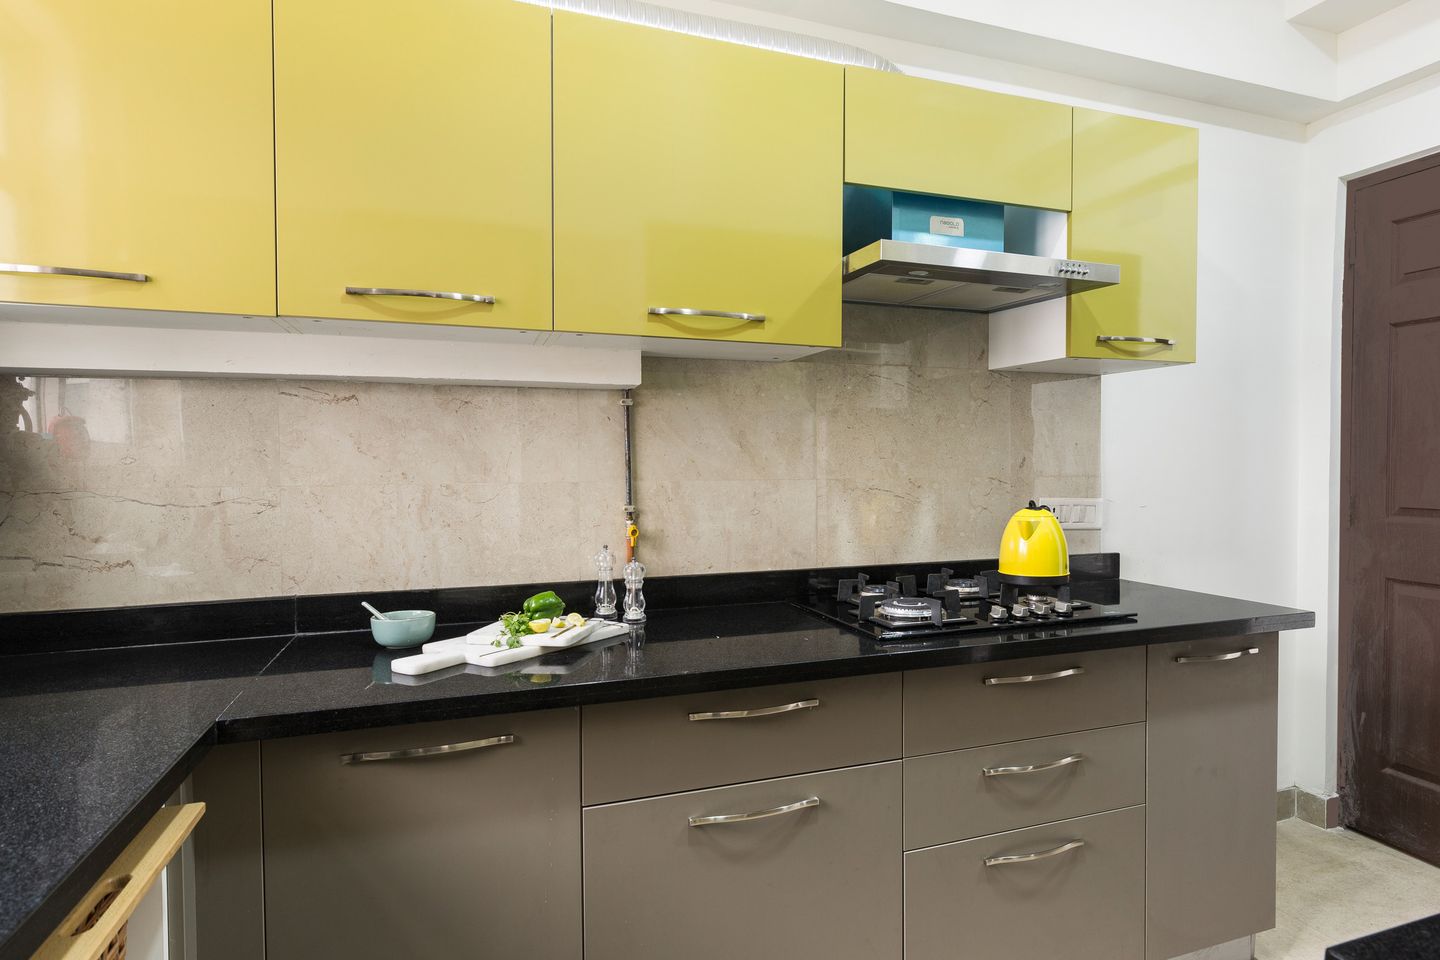 12x7 Ft Dove Grey Base and Marrigold Yellow Parallel Modular Kitchen - Livspace